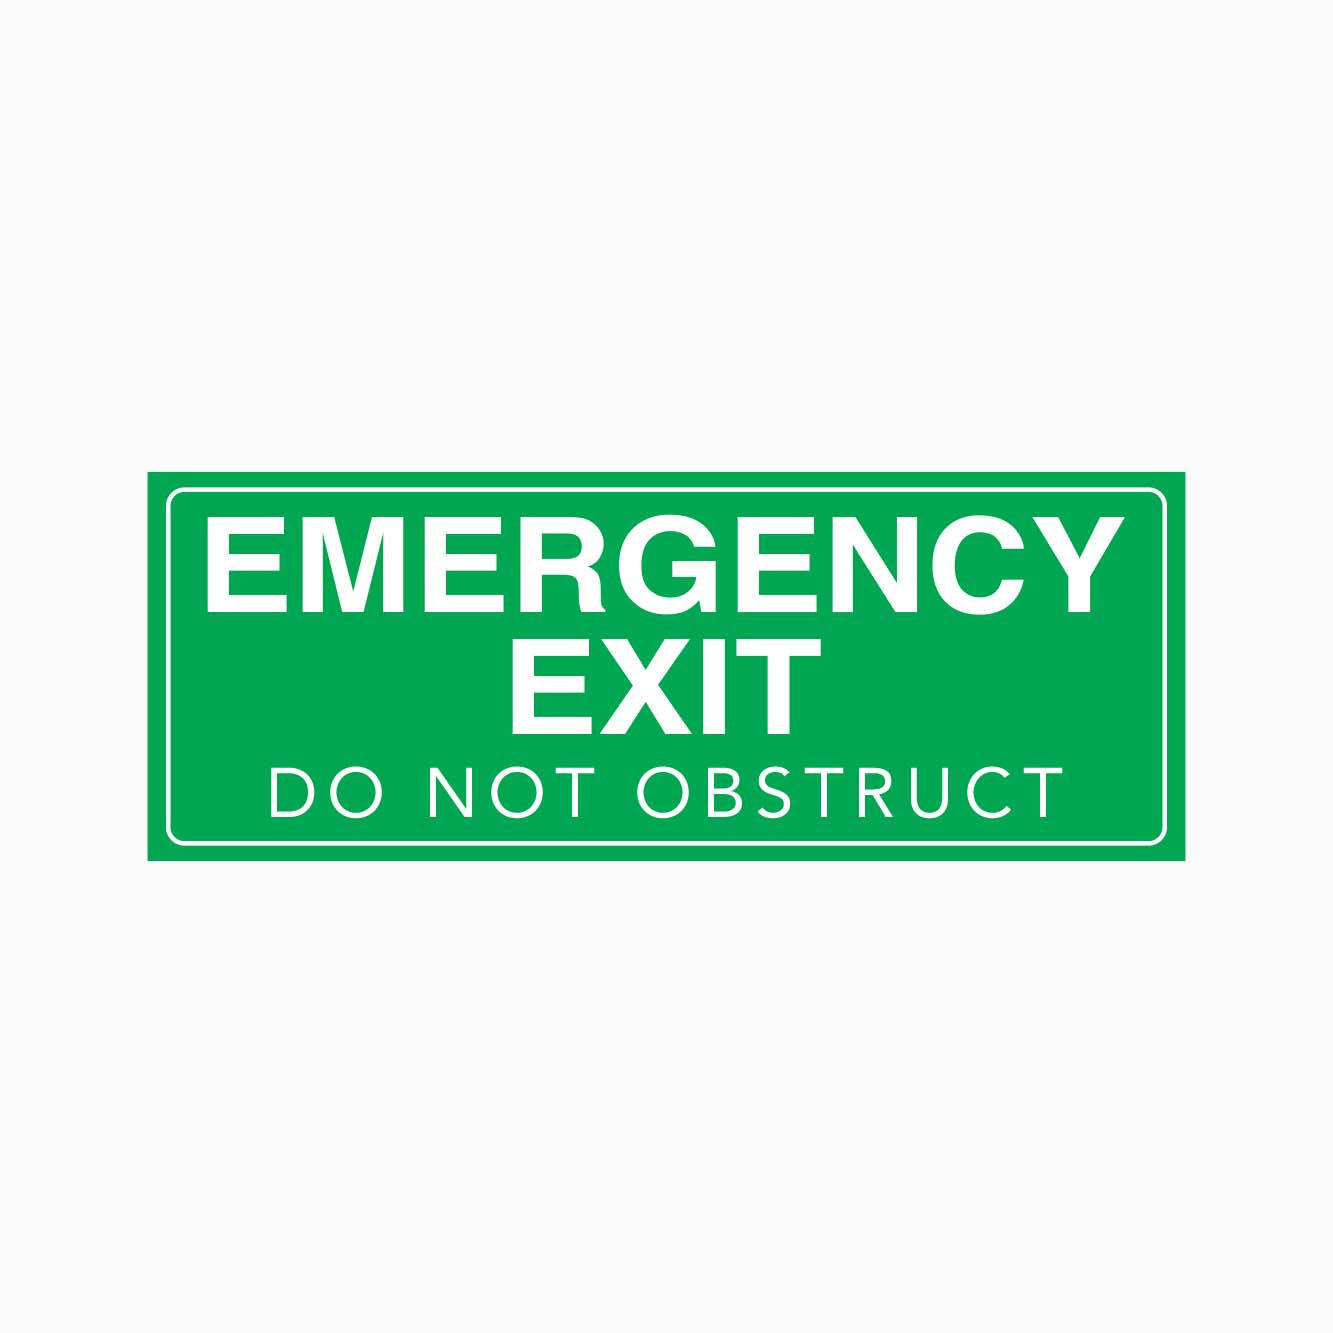 EMERGENCY EXIT DO NOT OBSTRUCT SIGN - GET SIGNS